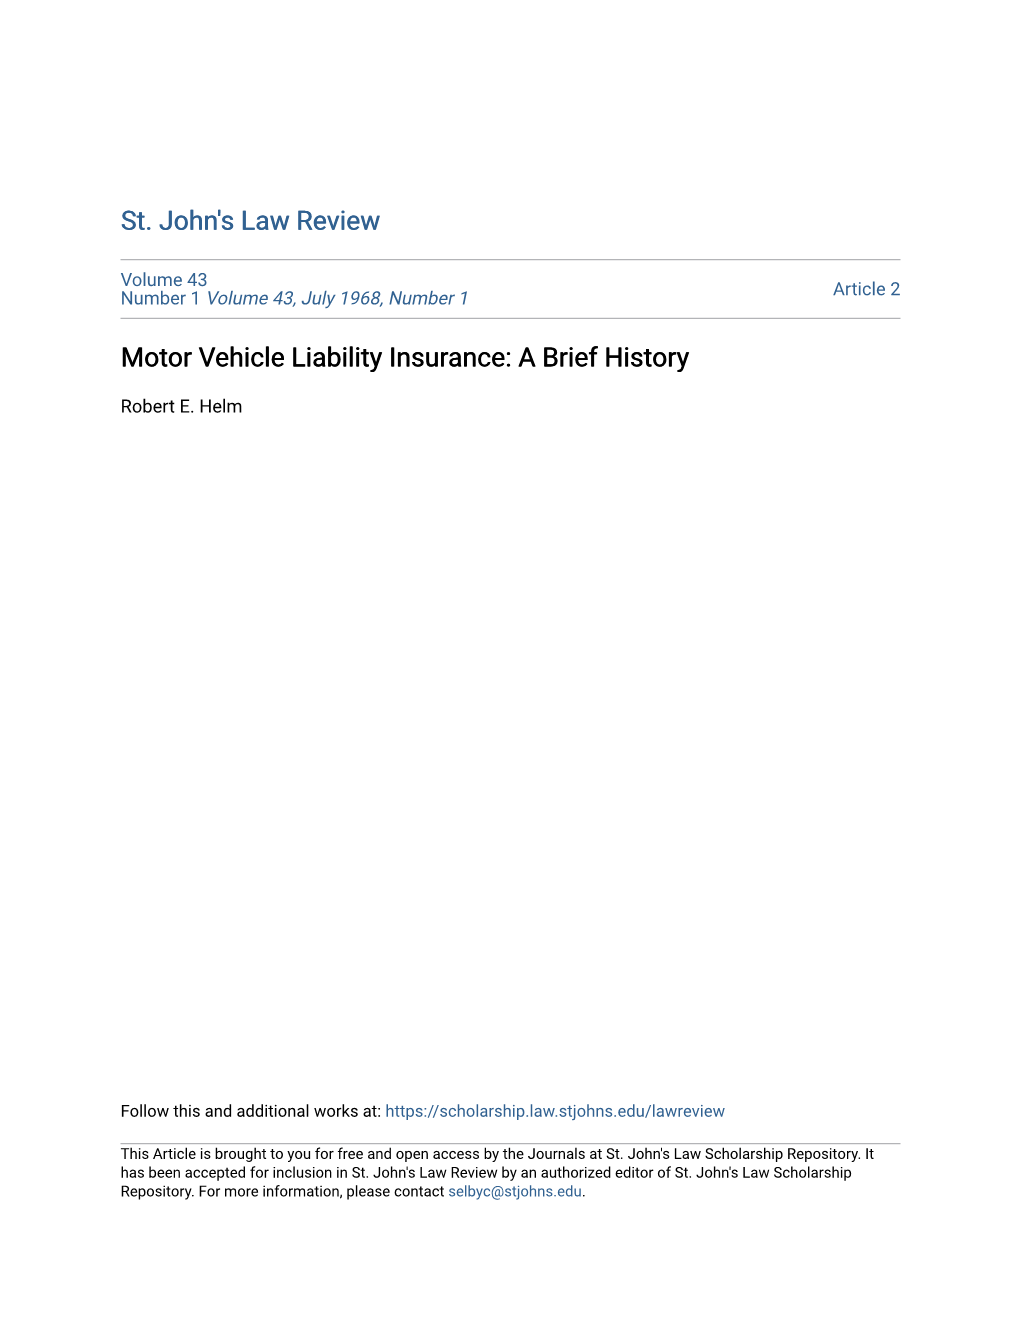 Motor Vehicle Liability Insurance: a Brief History